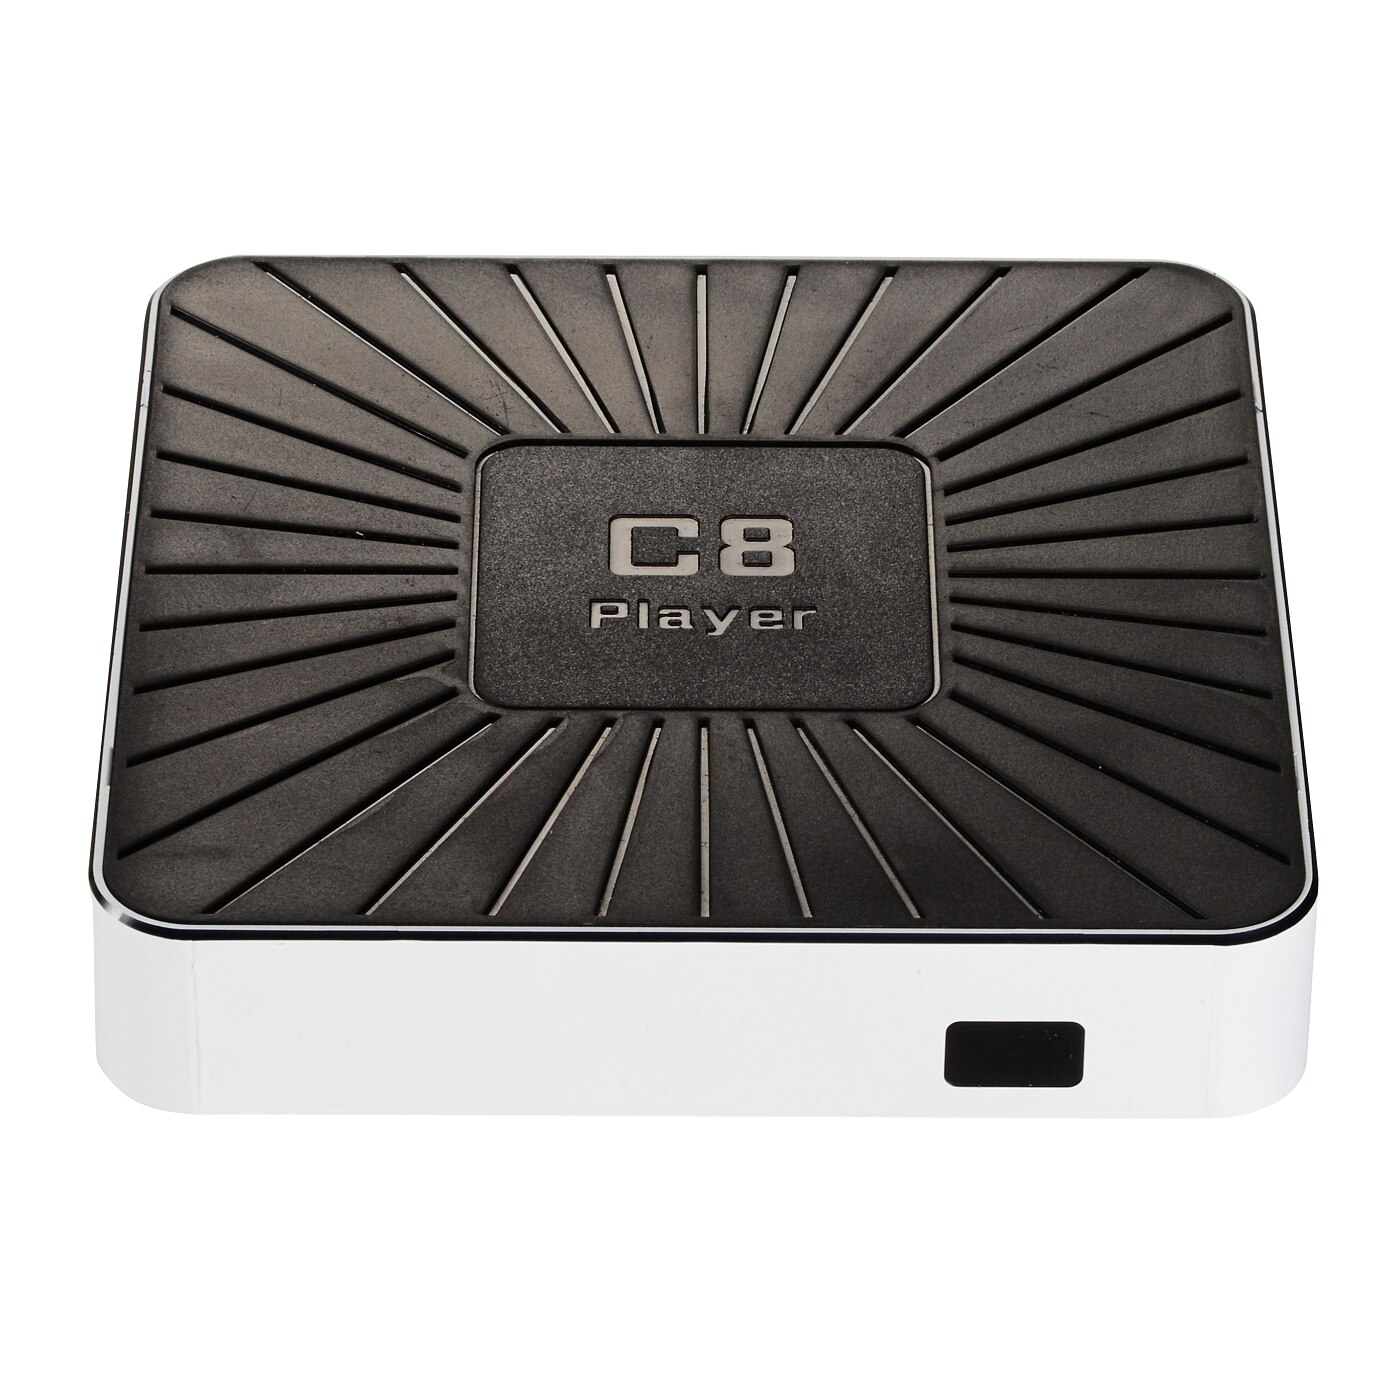 C8PLAYER? ? ???? ?? TV-BOX SD ī ִ 32GB  SDR  HDR   ȯ /C8PLAYER  ȵ̵ TV-BOX SD Card Up To 32GB  Support Conversion Between SDR and H